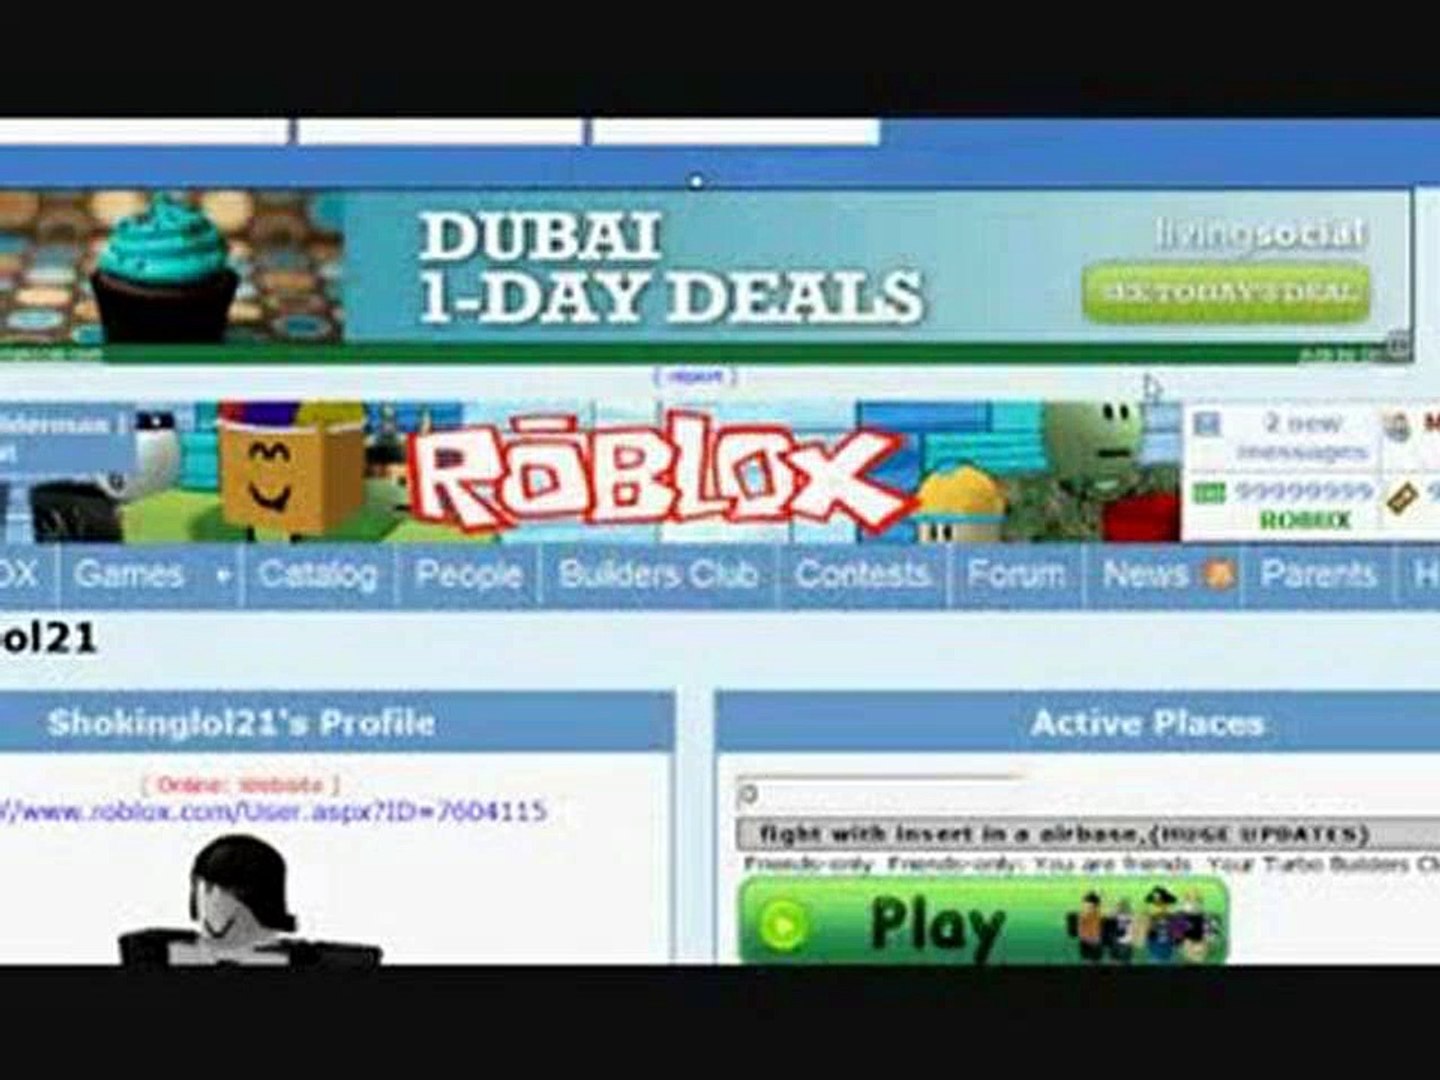 Roblox Robux Generator December 2014 No Surveys No Viruses Updated Video Dailymotion - roblox robux hack no download 2014